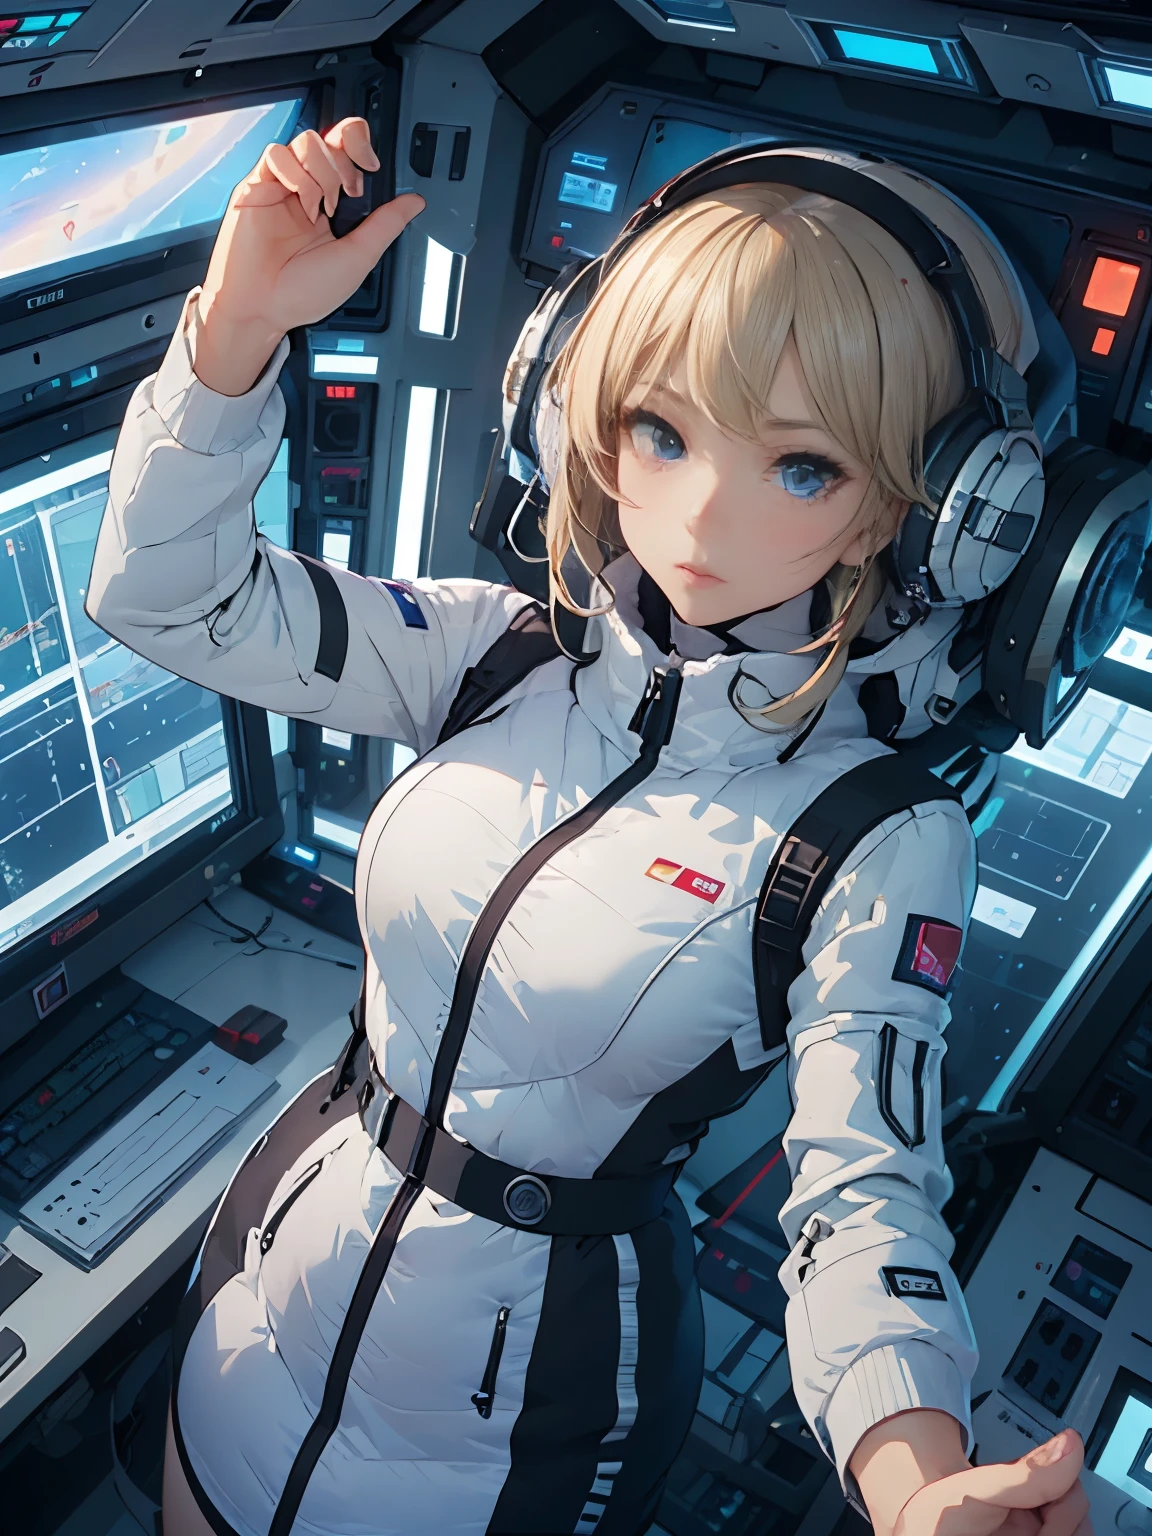 (Trained Female Soldiers)、1 Women、thick body、(Black combat uniform)、(platinum-blonde-hair:1.2)、((超A high resolution))、Detail Write、​masterpiece、top-quality、extremely details CG、8K picture quality、Cinematographic lighting、lensflare、Hyper-detailing、Fighter in the sky、Military drones, inside futuristic space station, Scifi space ship control room